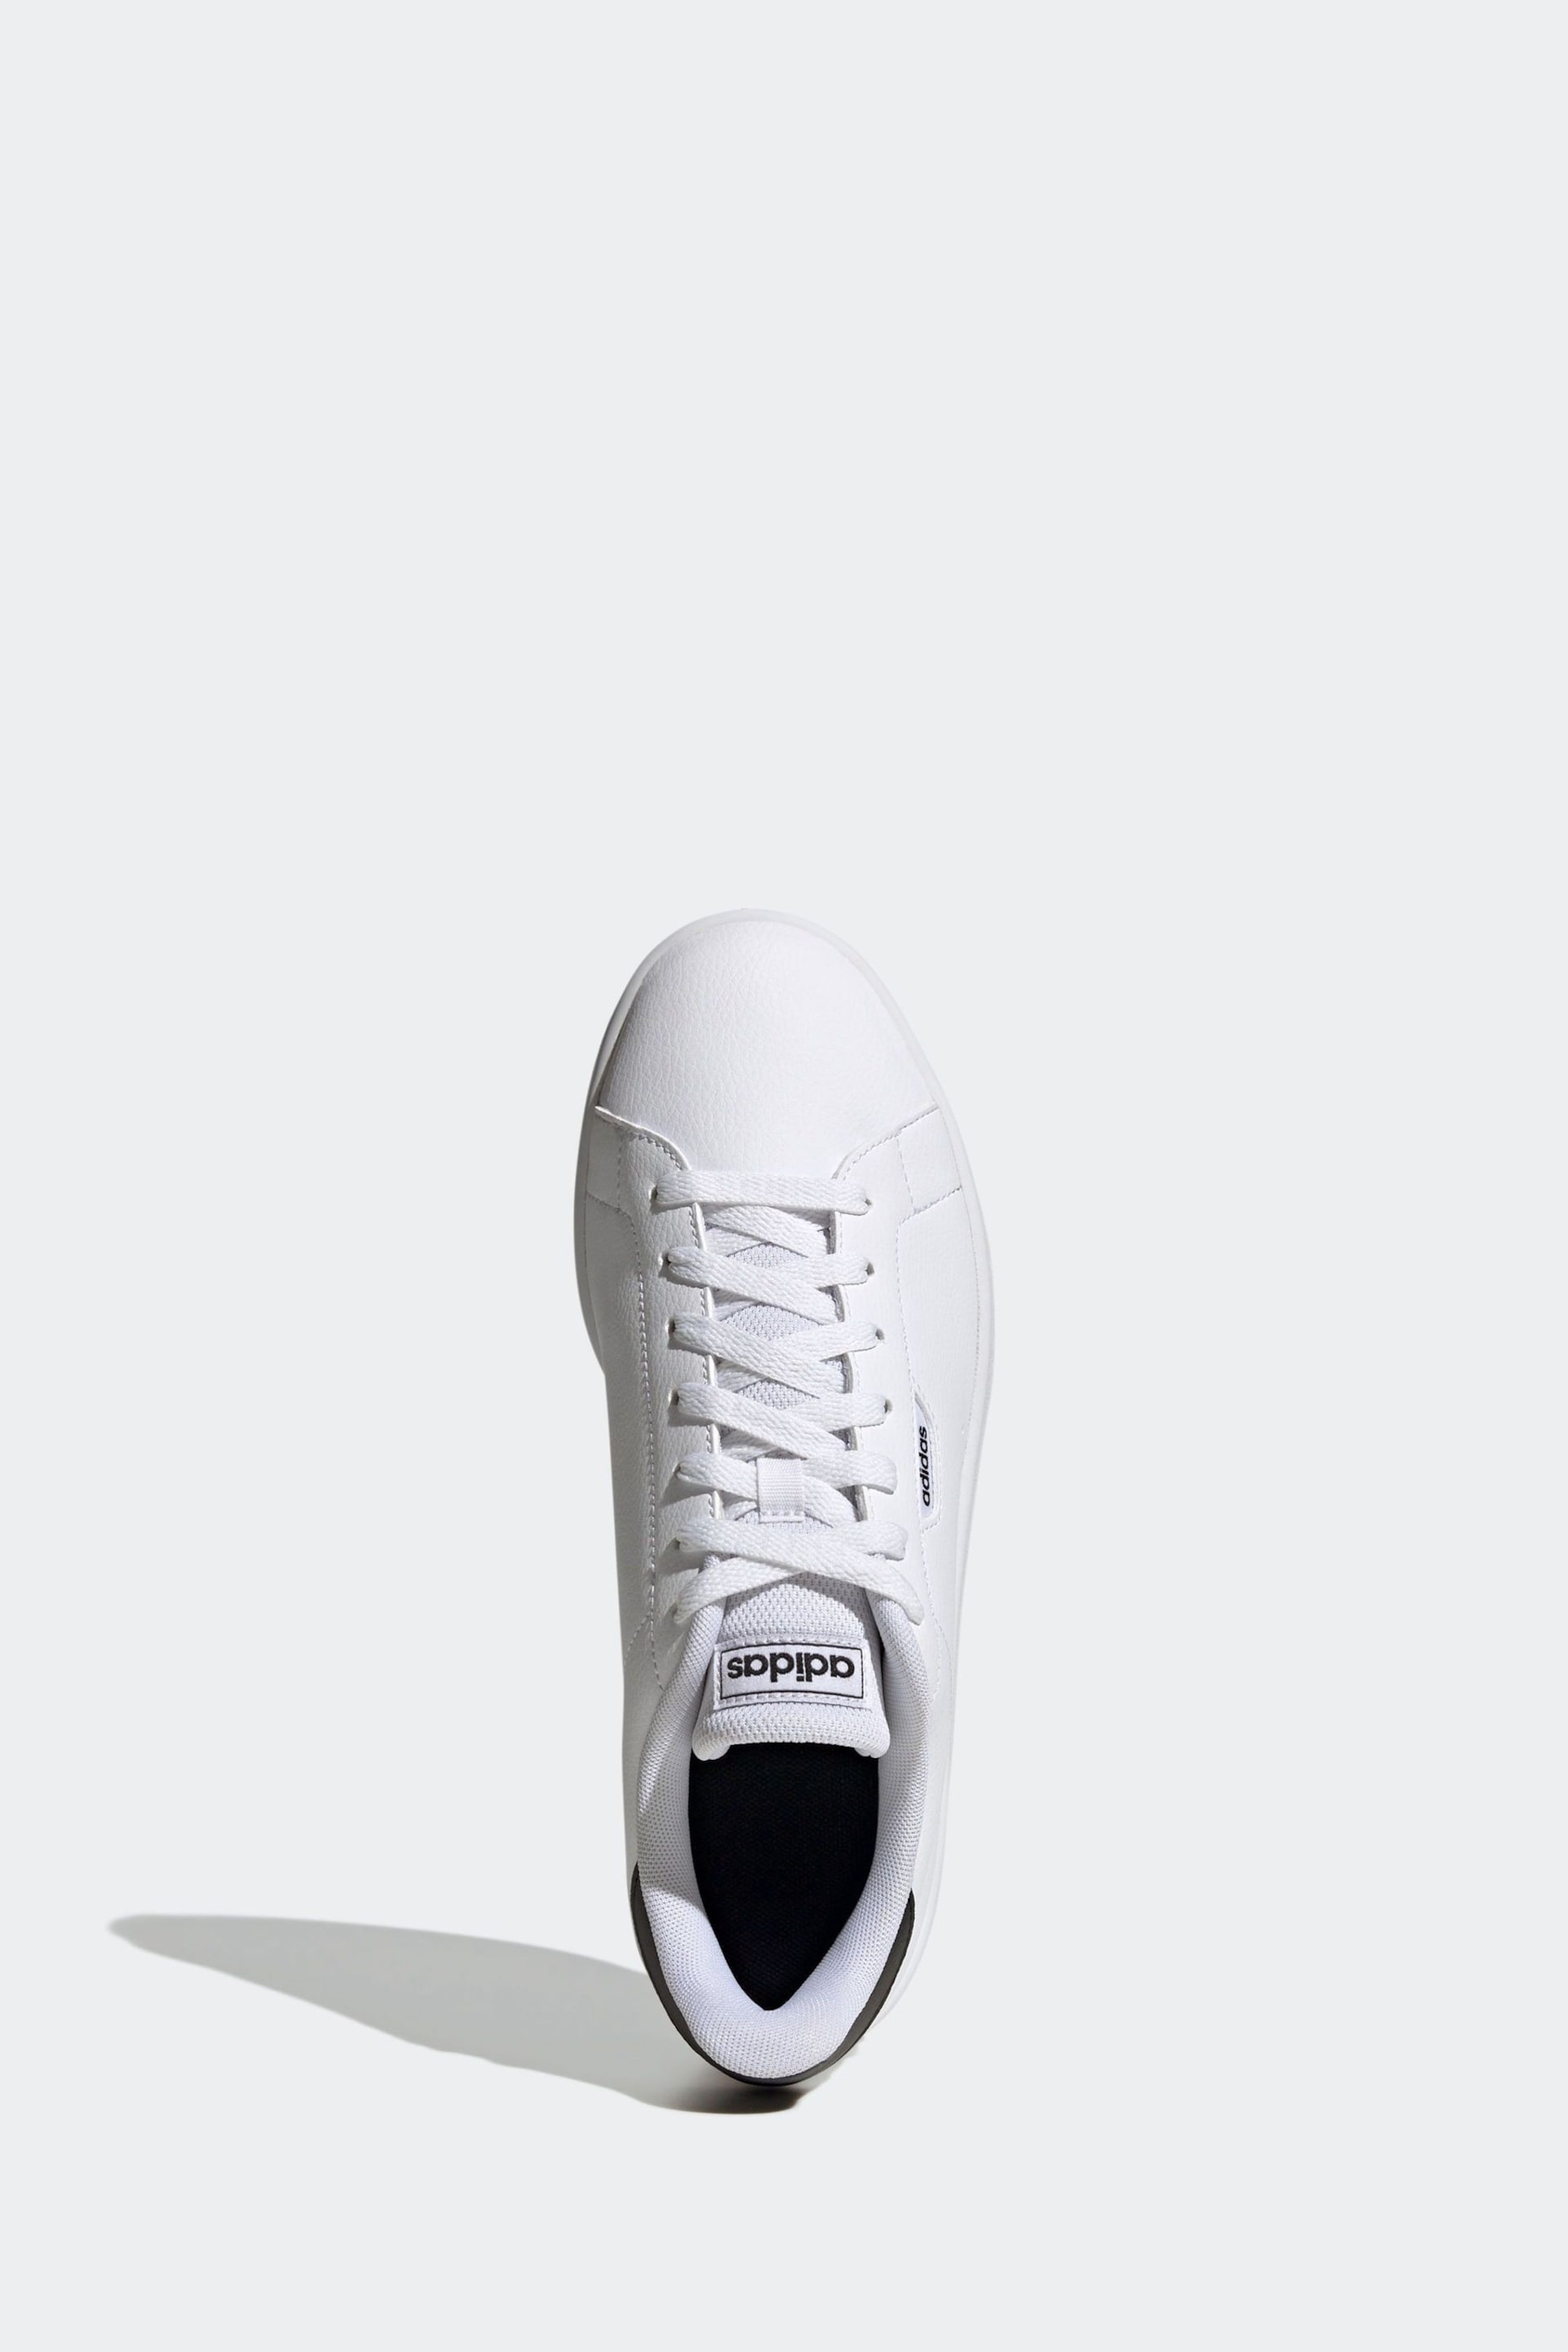 adidas White Urban Court Trainers - Image 5 of 8